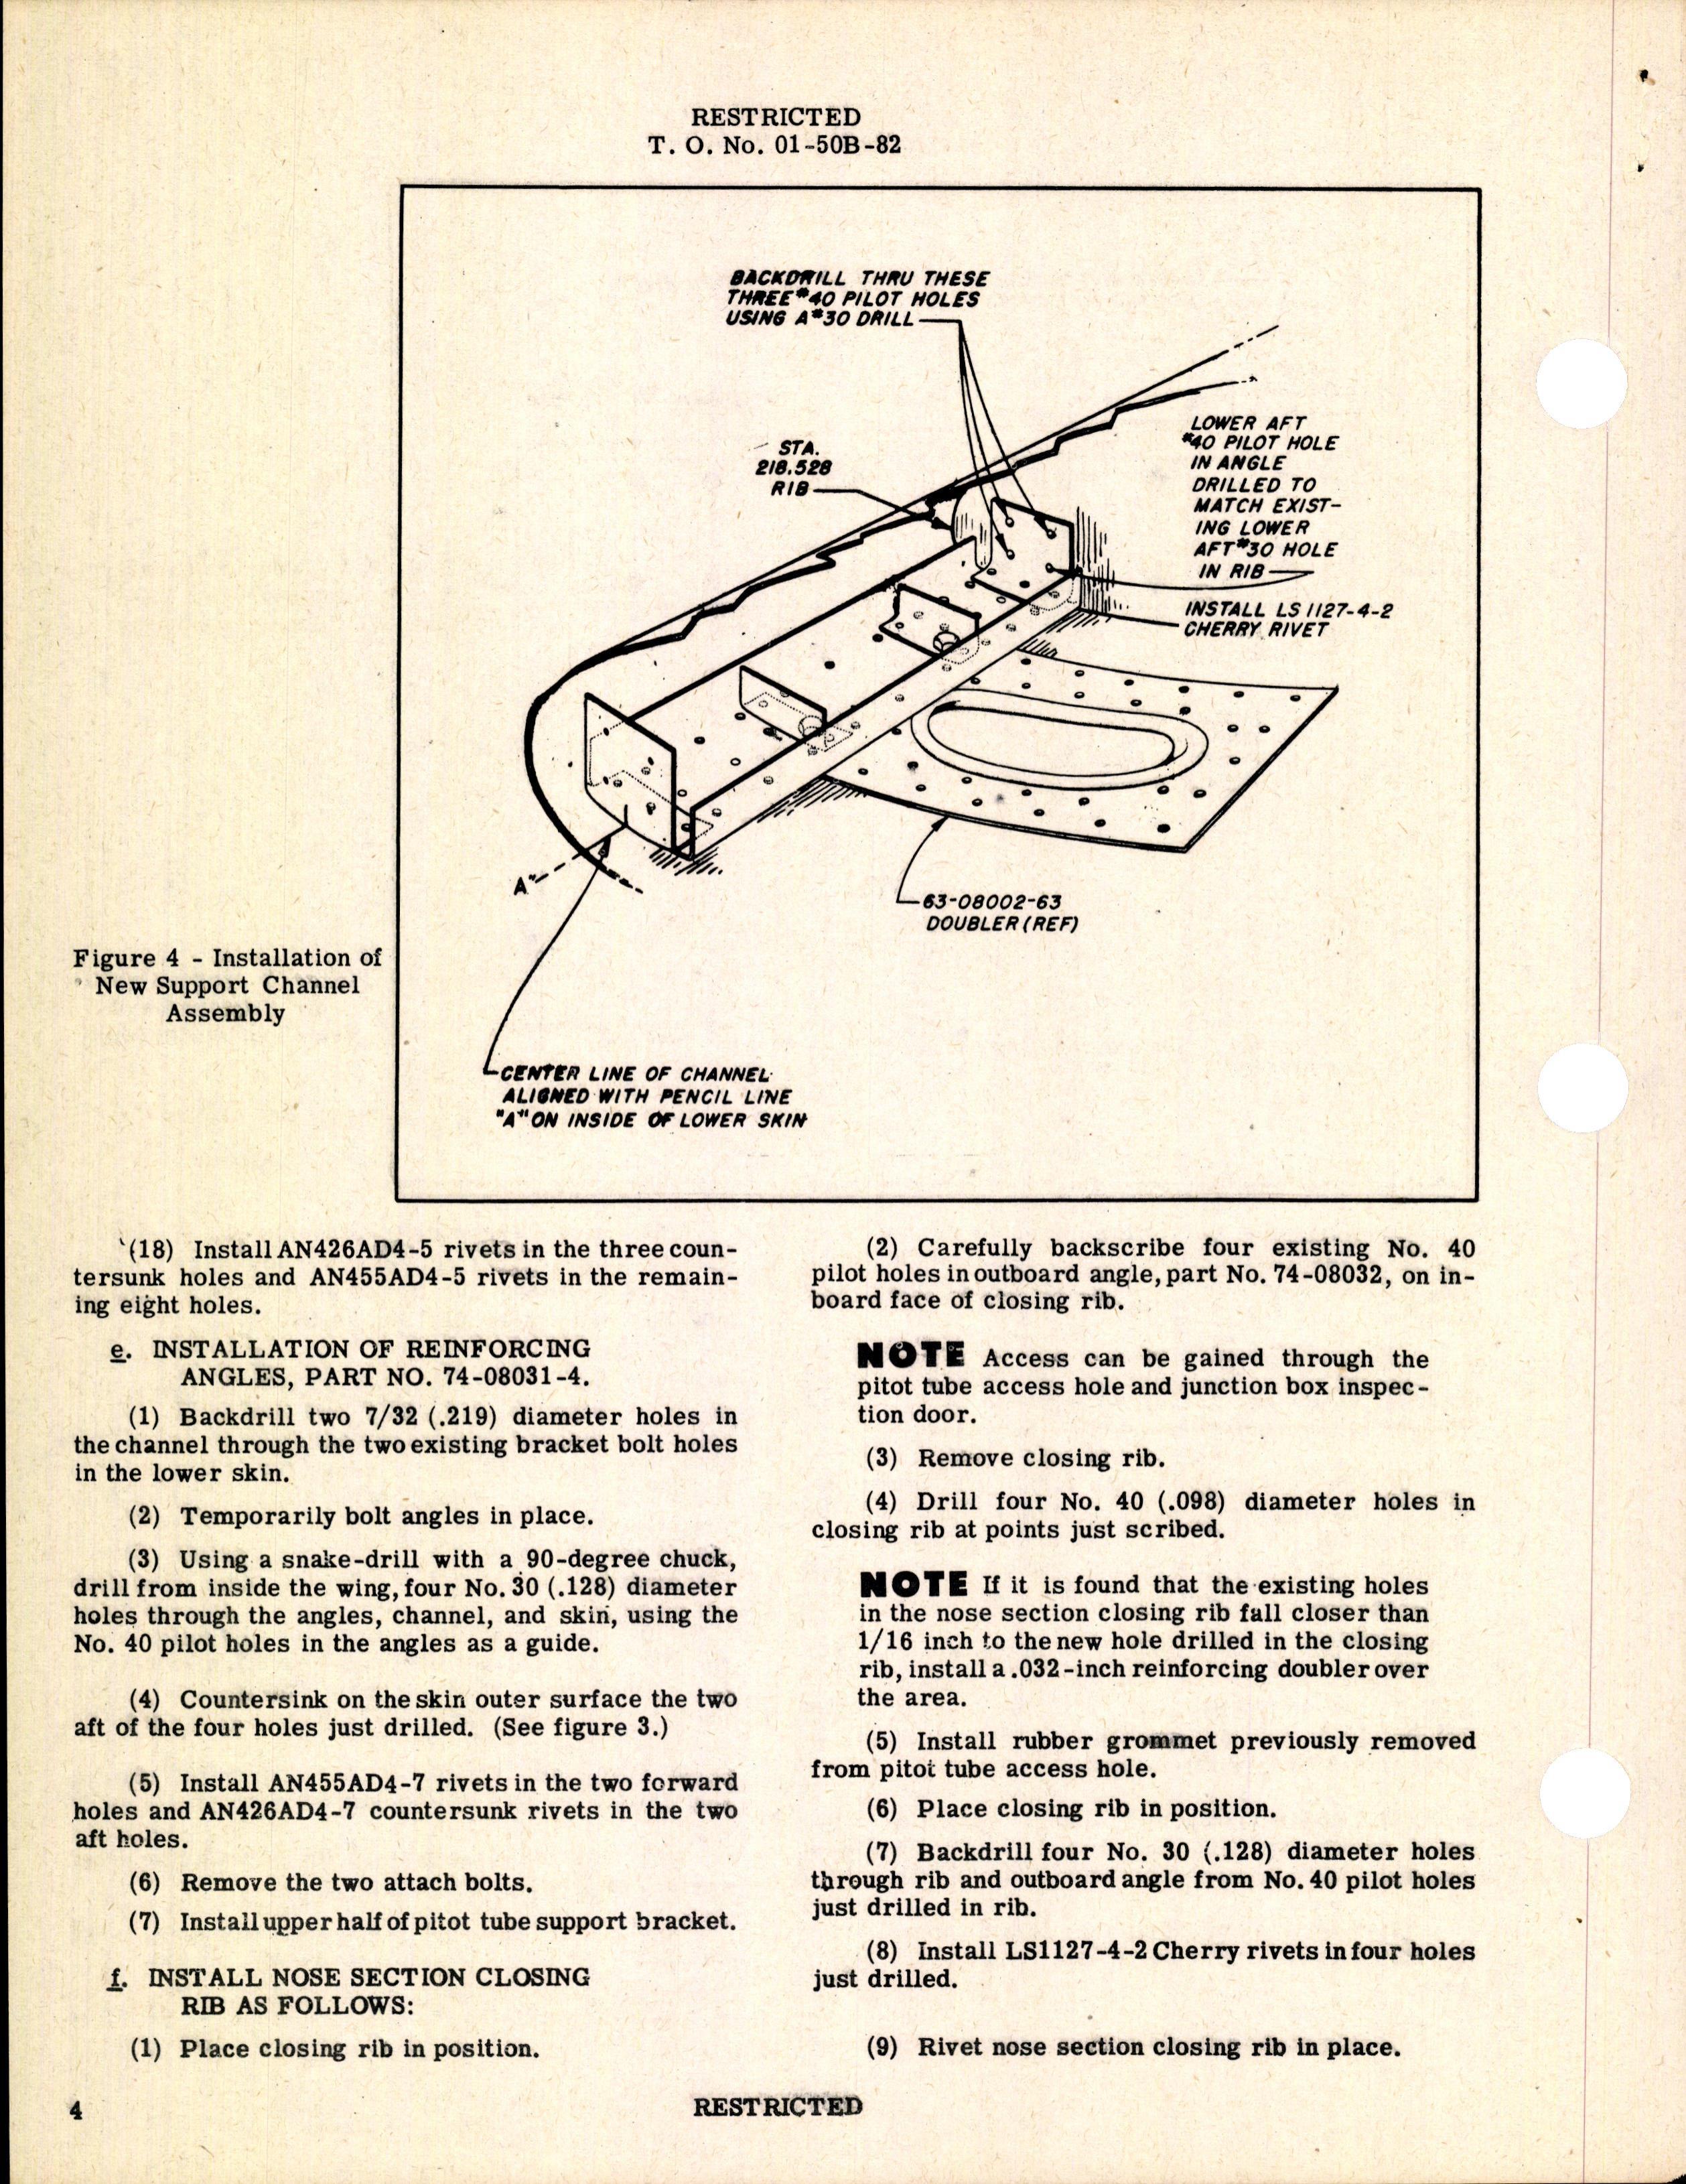 Sample page 4 from AirCorps Library document: Replacing Pitot Tube Support Channel - BT-13, BT-13A, BT-13B, BT-15, SNV-1, and SNV-2